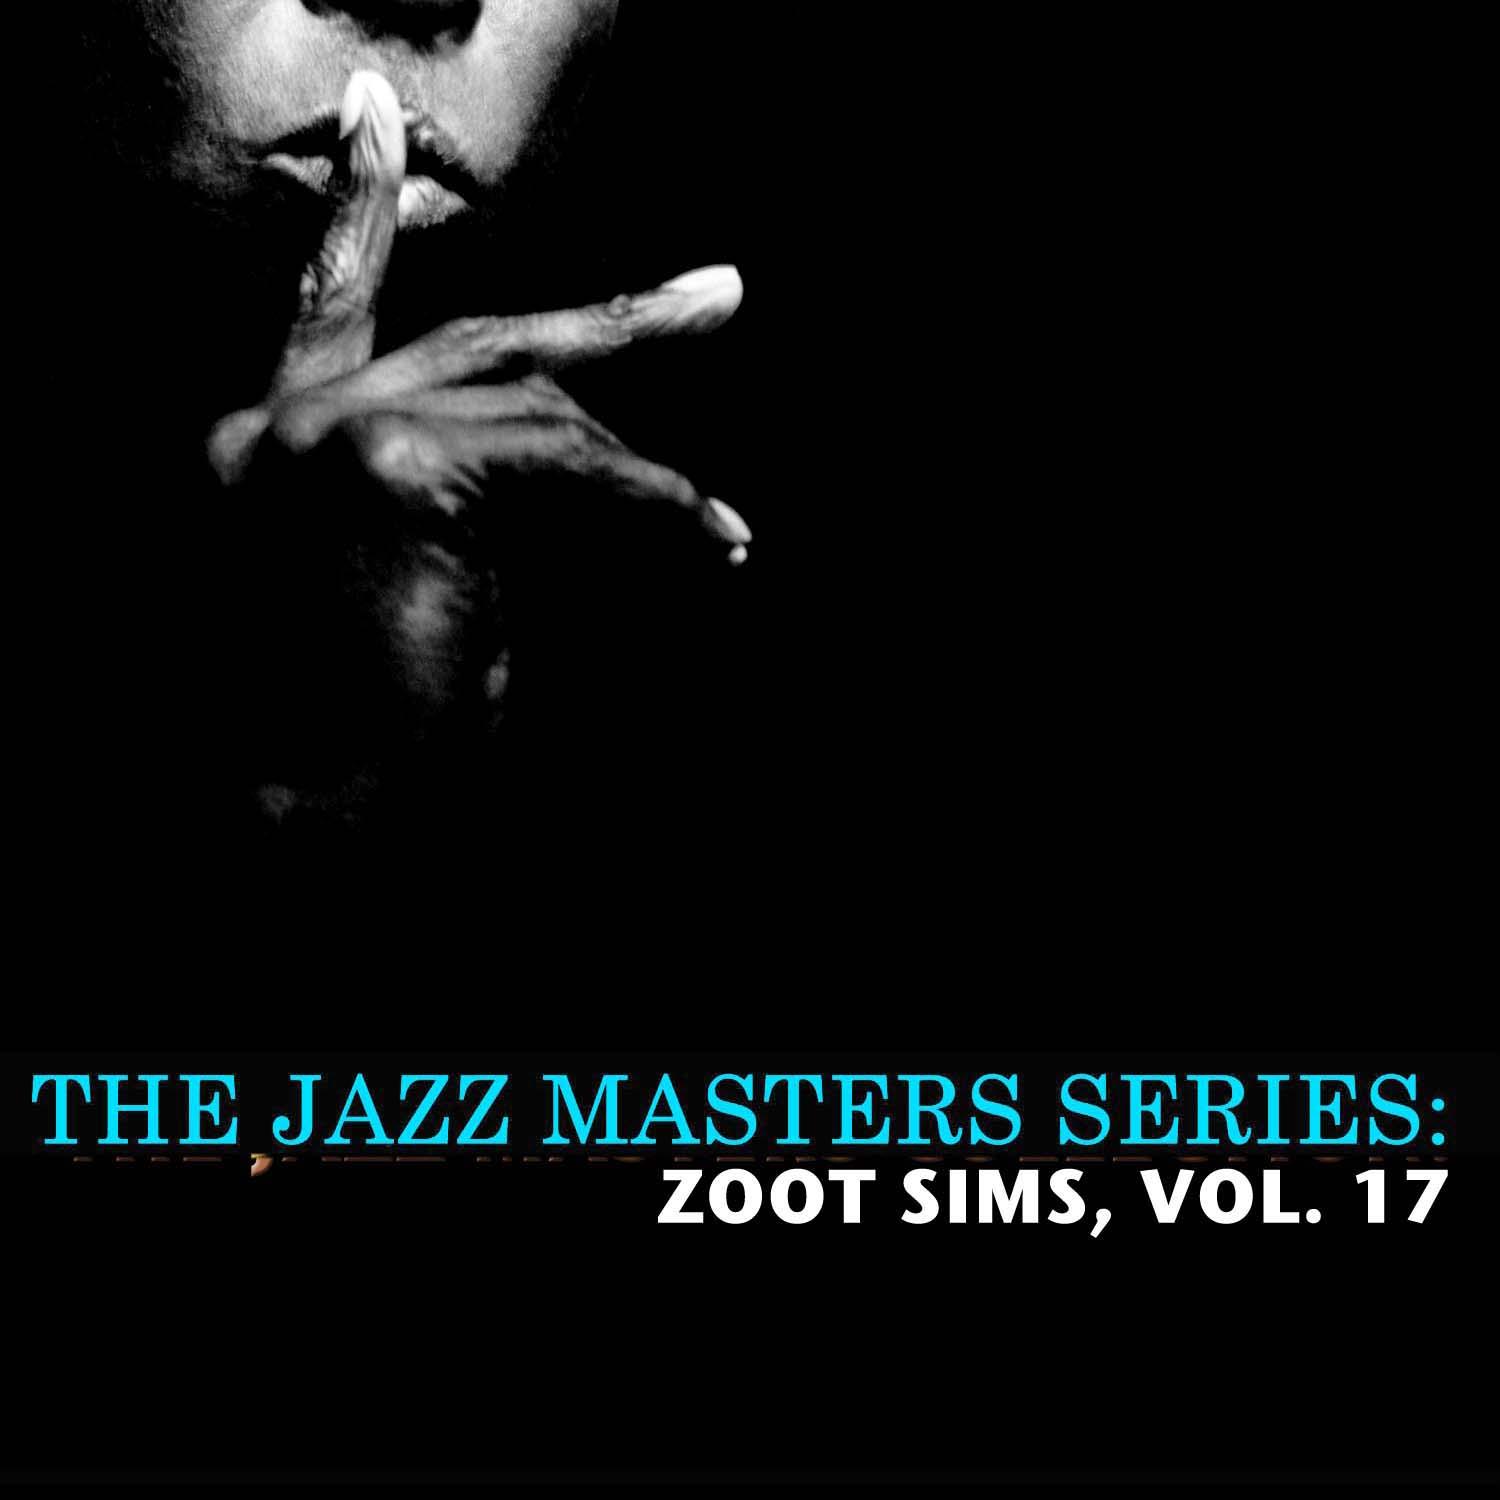 The Jazz Masters Series: Zoot Sims, Vol. 17